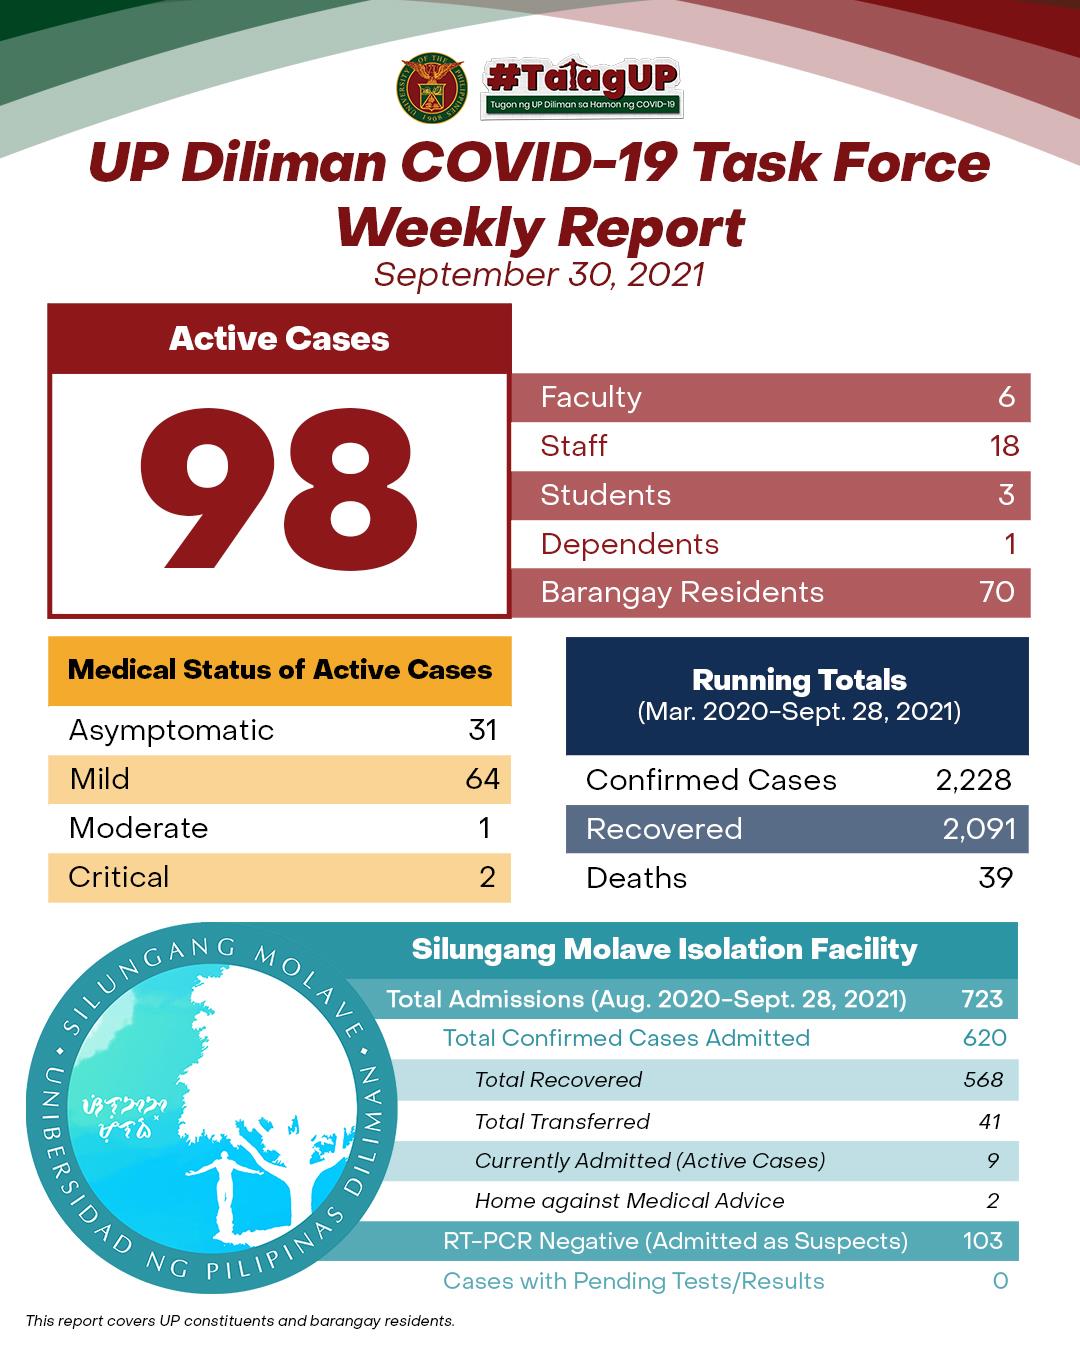 UP Diliman COVID-19 Task Force Weekly Report (September 30, 2021)